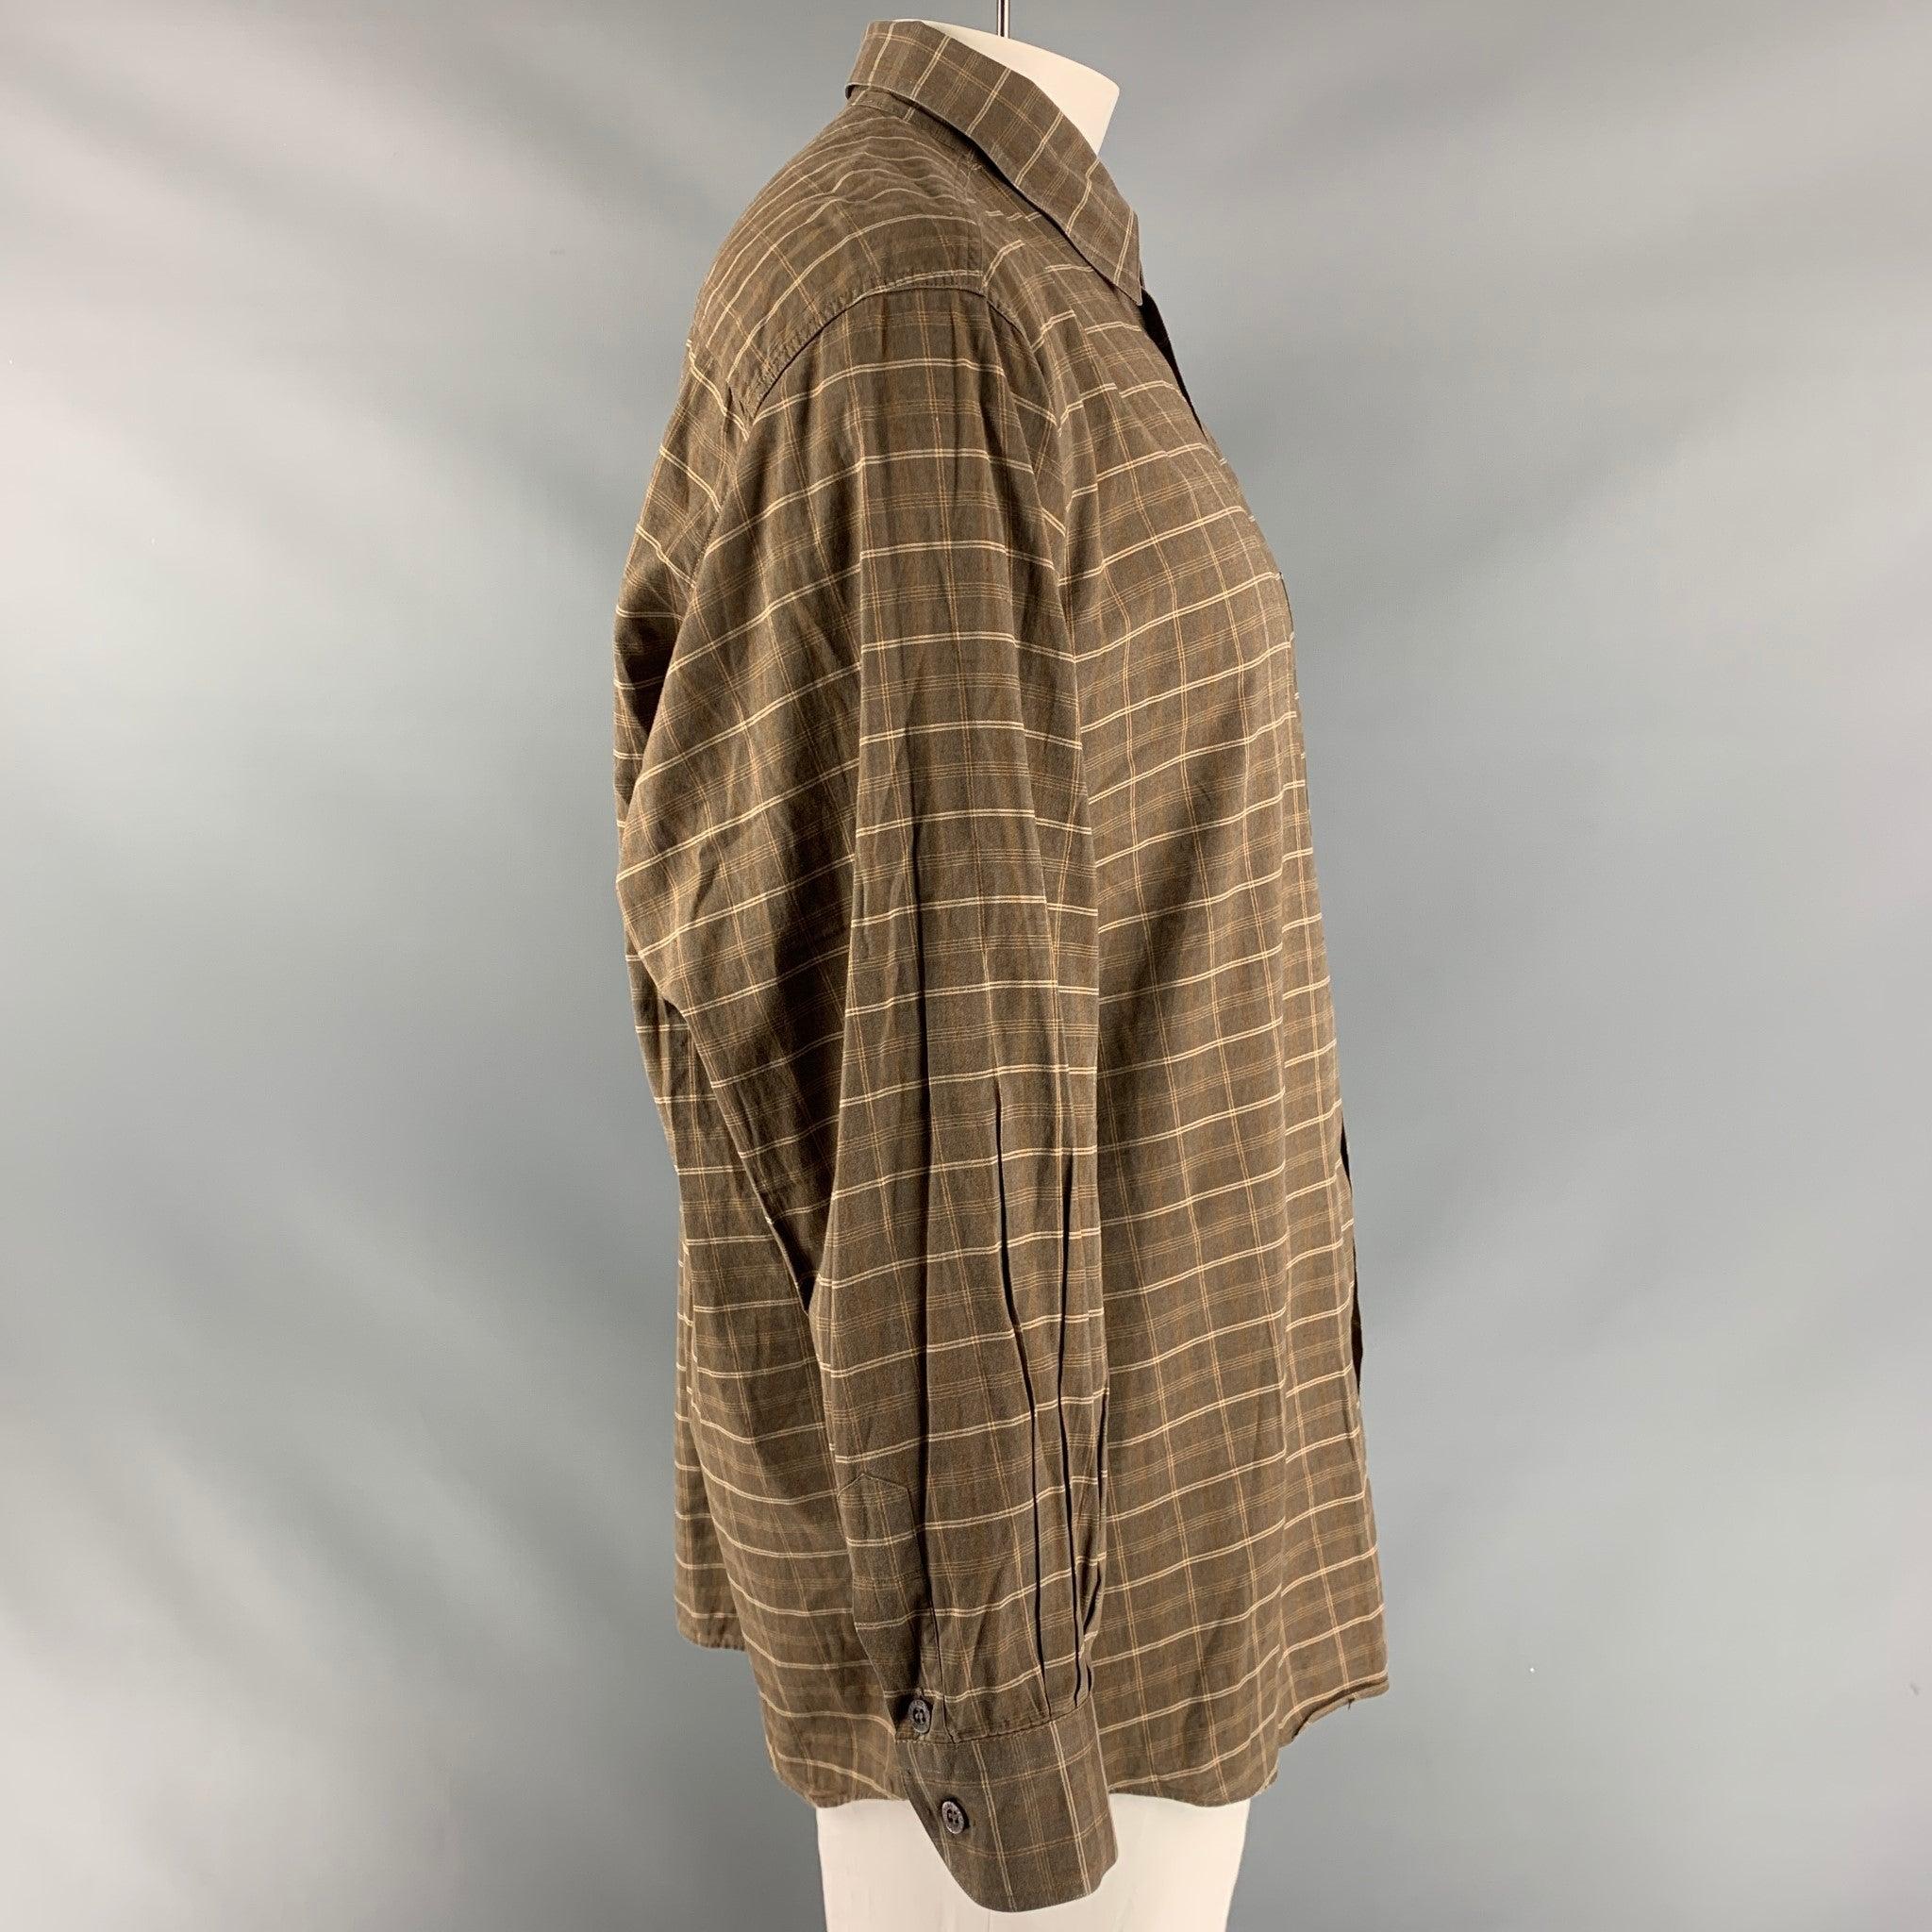 ERMENEGILDO ZEGNA long sleeve shirt comes in brown plaid cotton featuring a patch pocket at left side, straight collar, one button round cuff, and a button up closure. Made in Italy.Excellent Pre-Owned Condition.  

Marked:   XL 

Measurements: 
